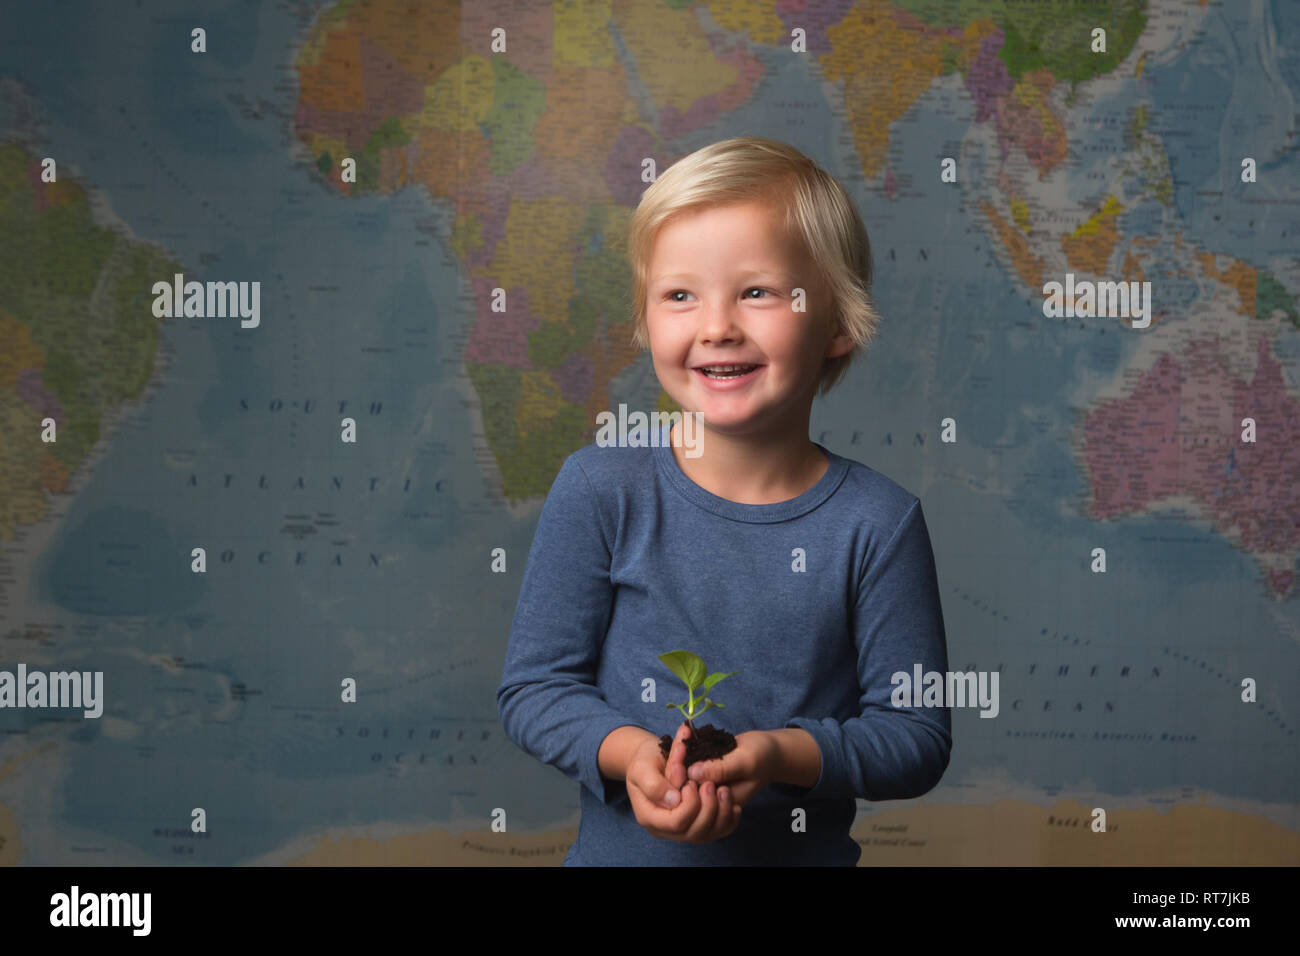 Cute blonde child carefully holds a seedling in front of a world map Stock Photo